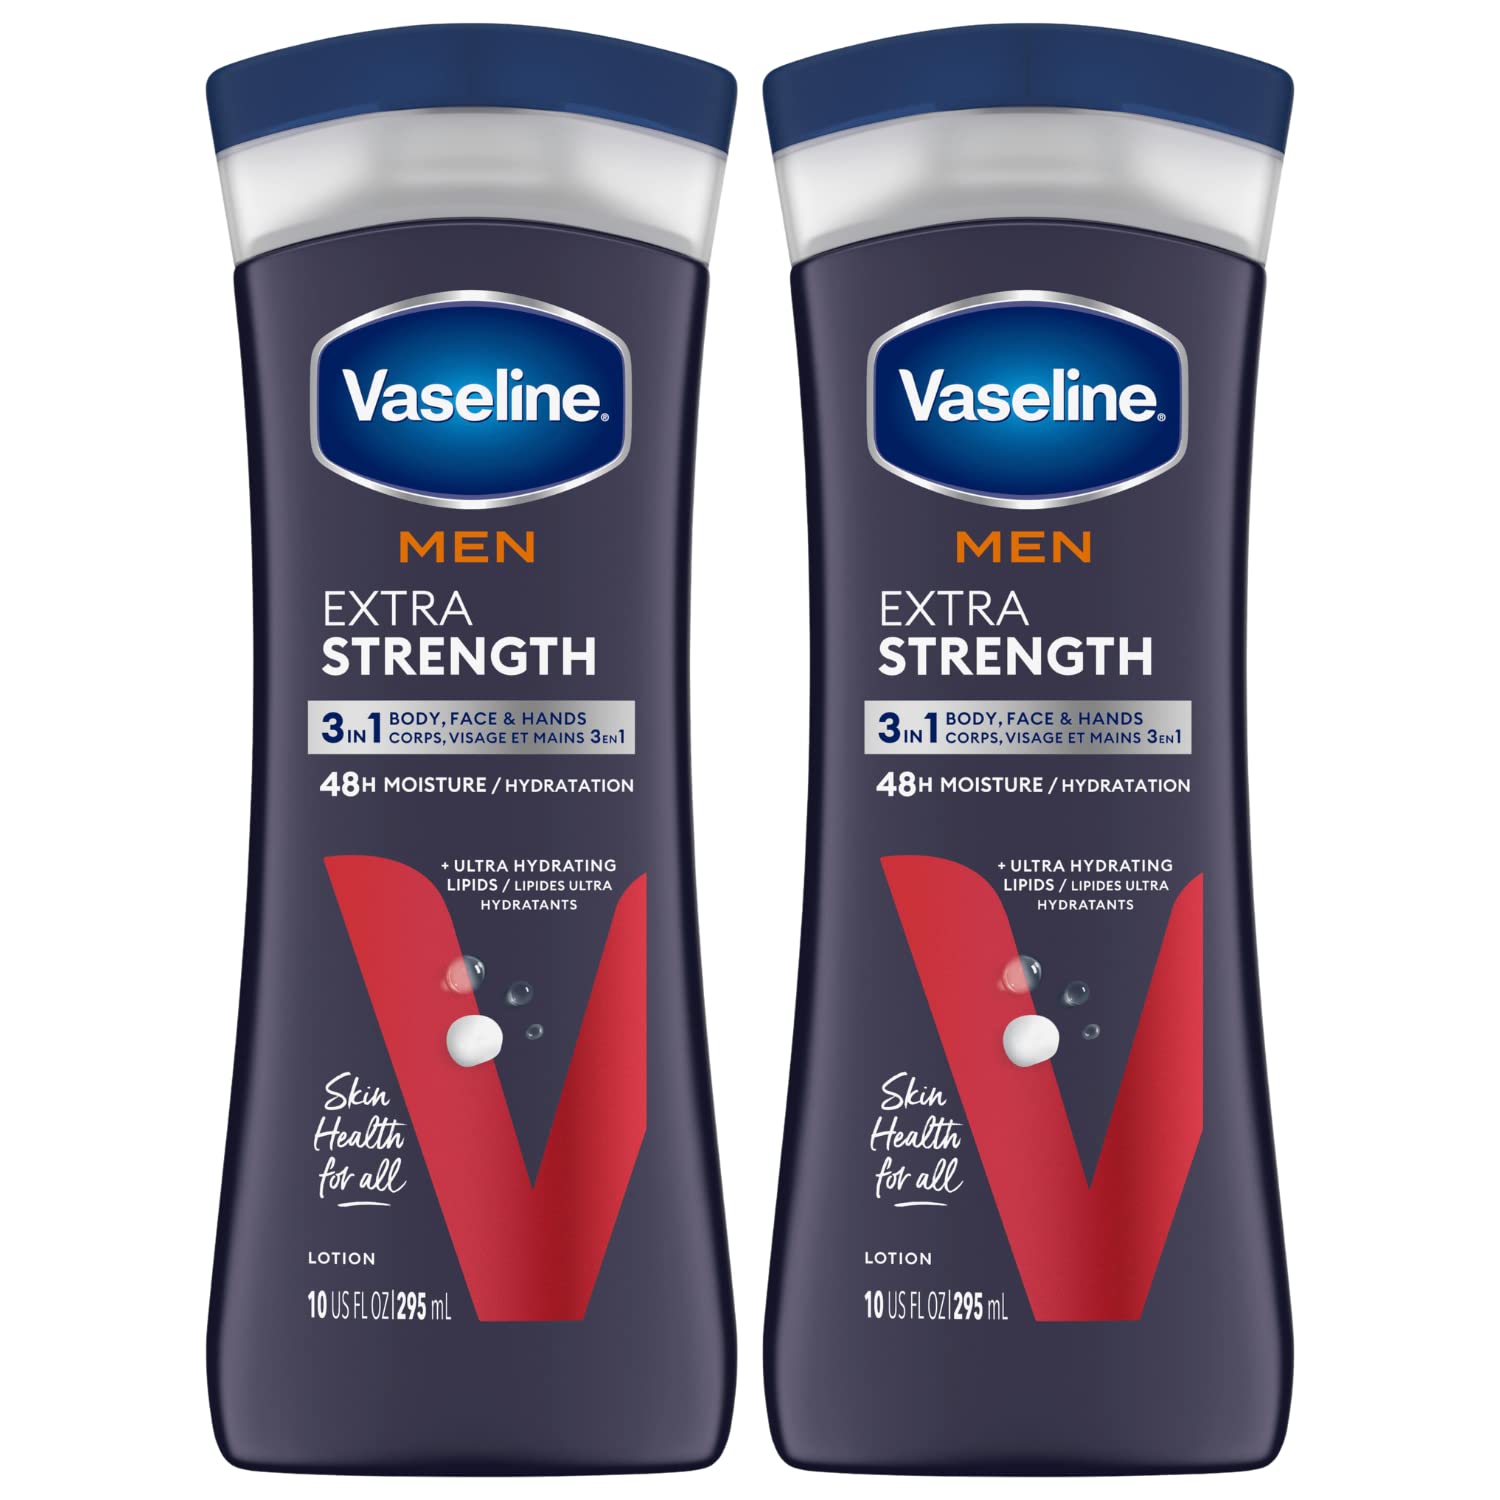 Vaseline Lotion for Dry Skin - Men Extra Strength Lotion, Fast-Absorbing Body Lotion Jelly and Ultra-Hydrating Lipids, 3-in-1 Body, Face, & Hands, 10 Oz Ea (Pack of 2)